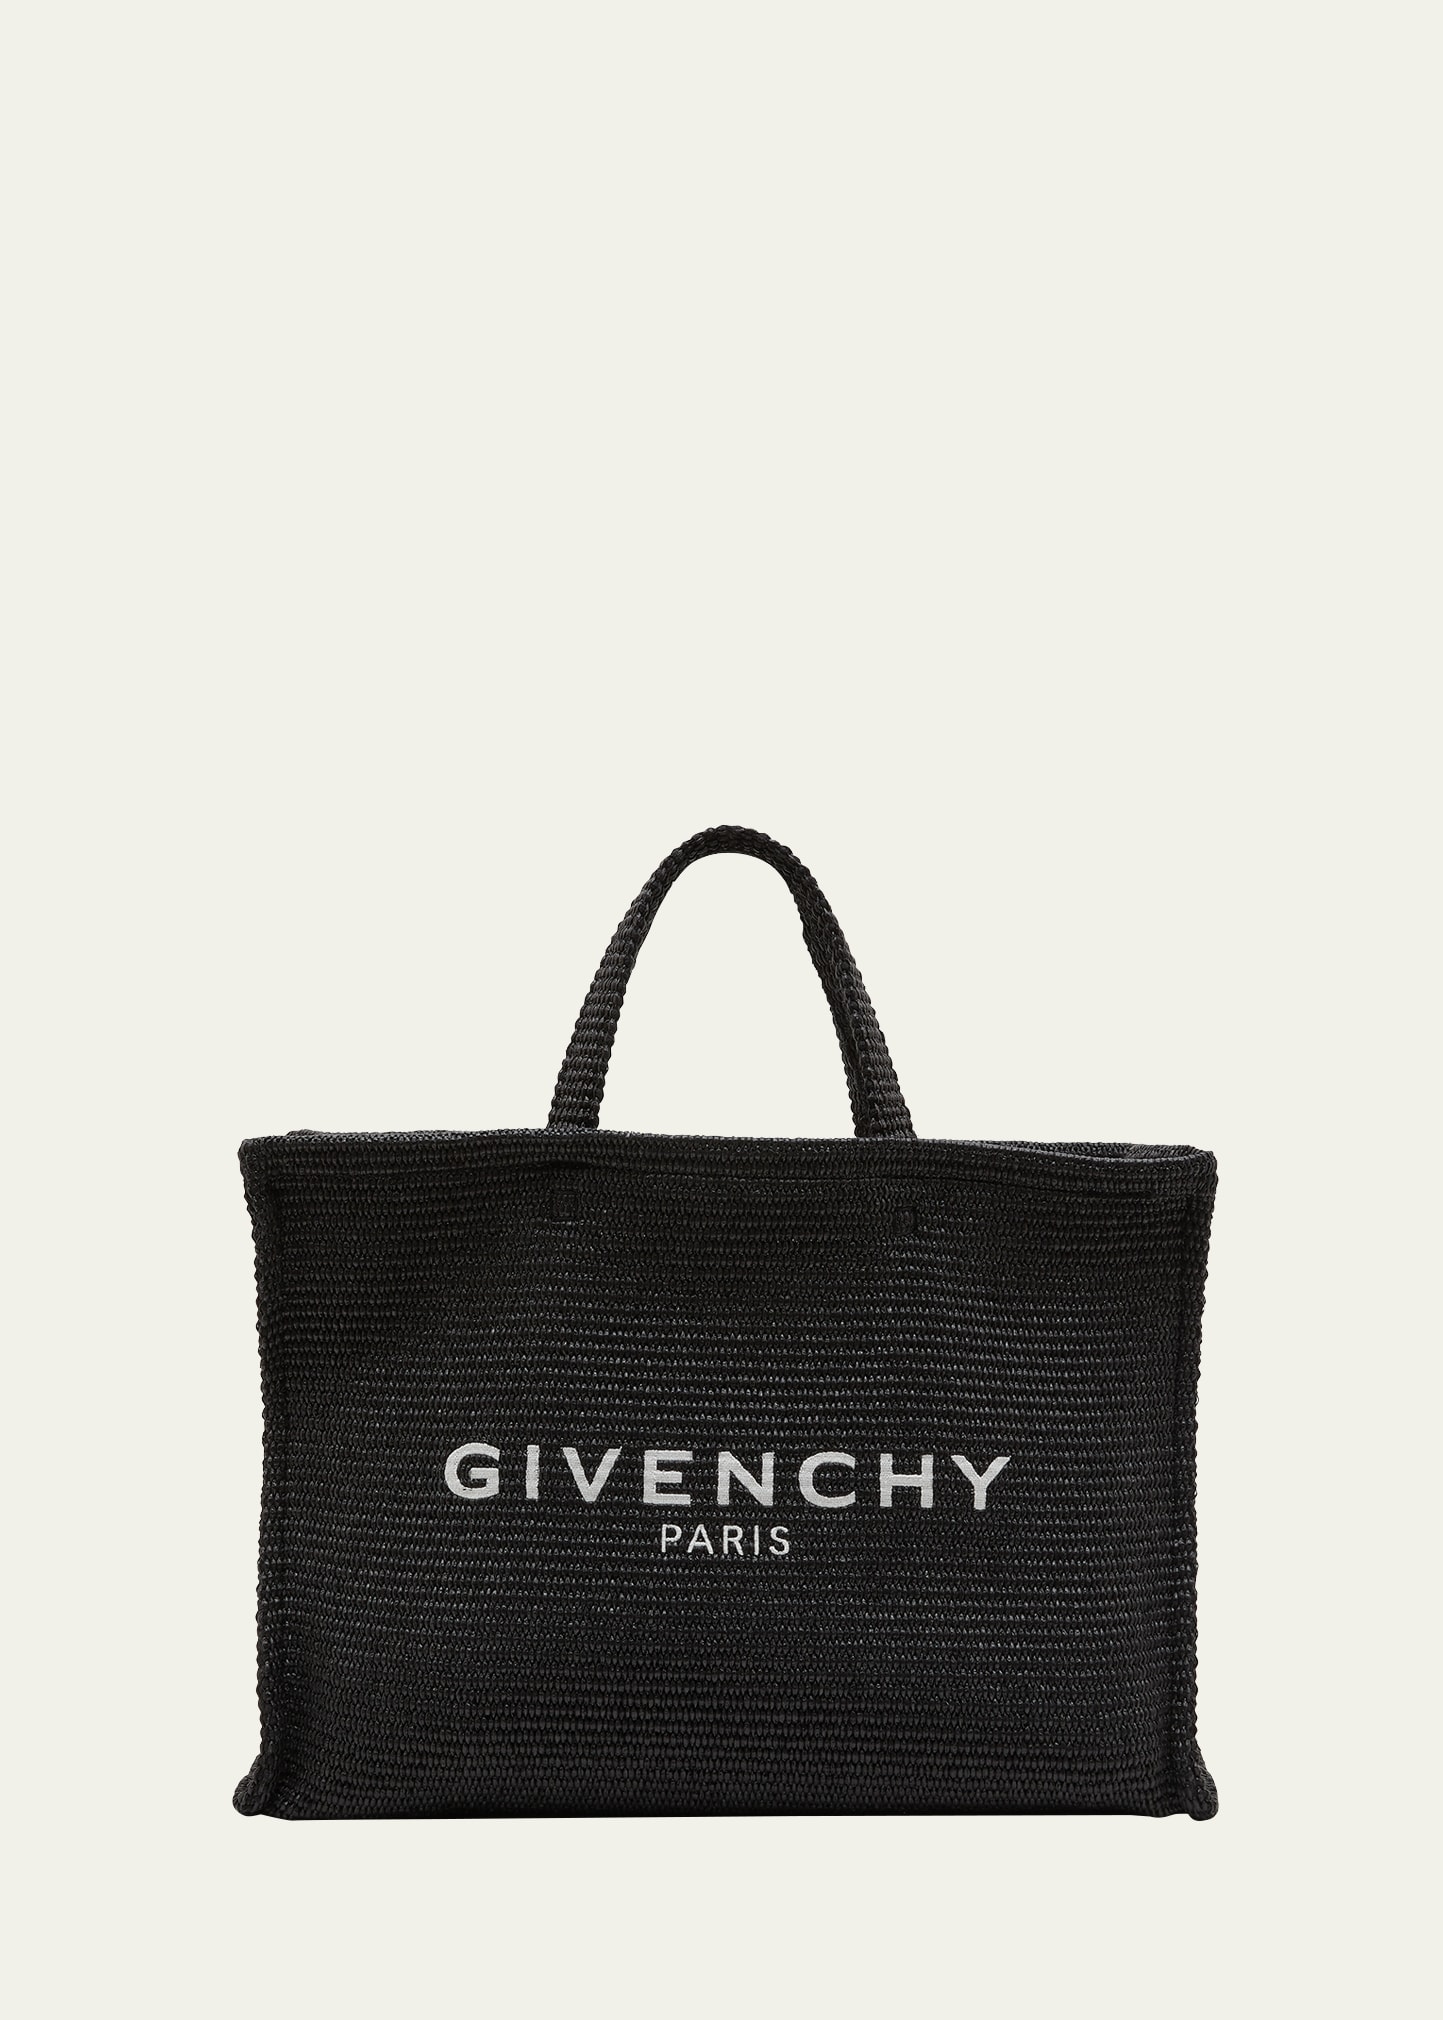 GIVENCHY G-TOTE LARGE SHOPPING BAG IN RAFFIA